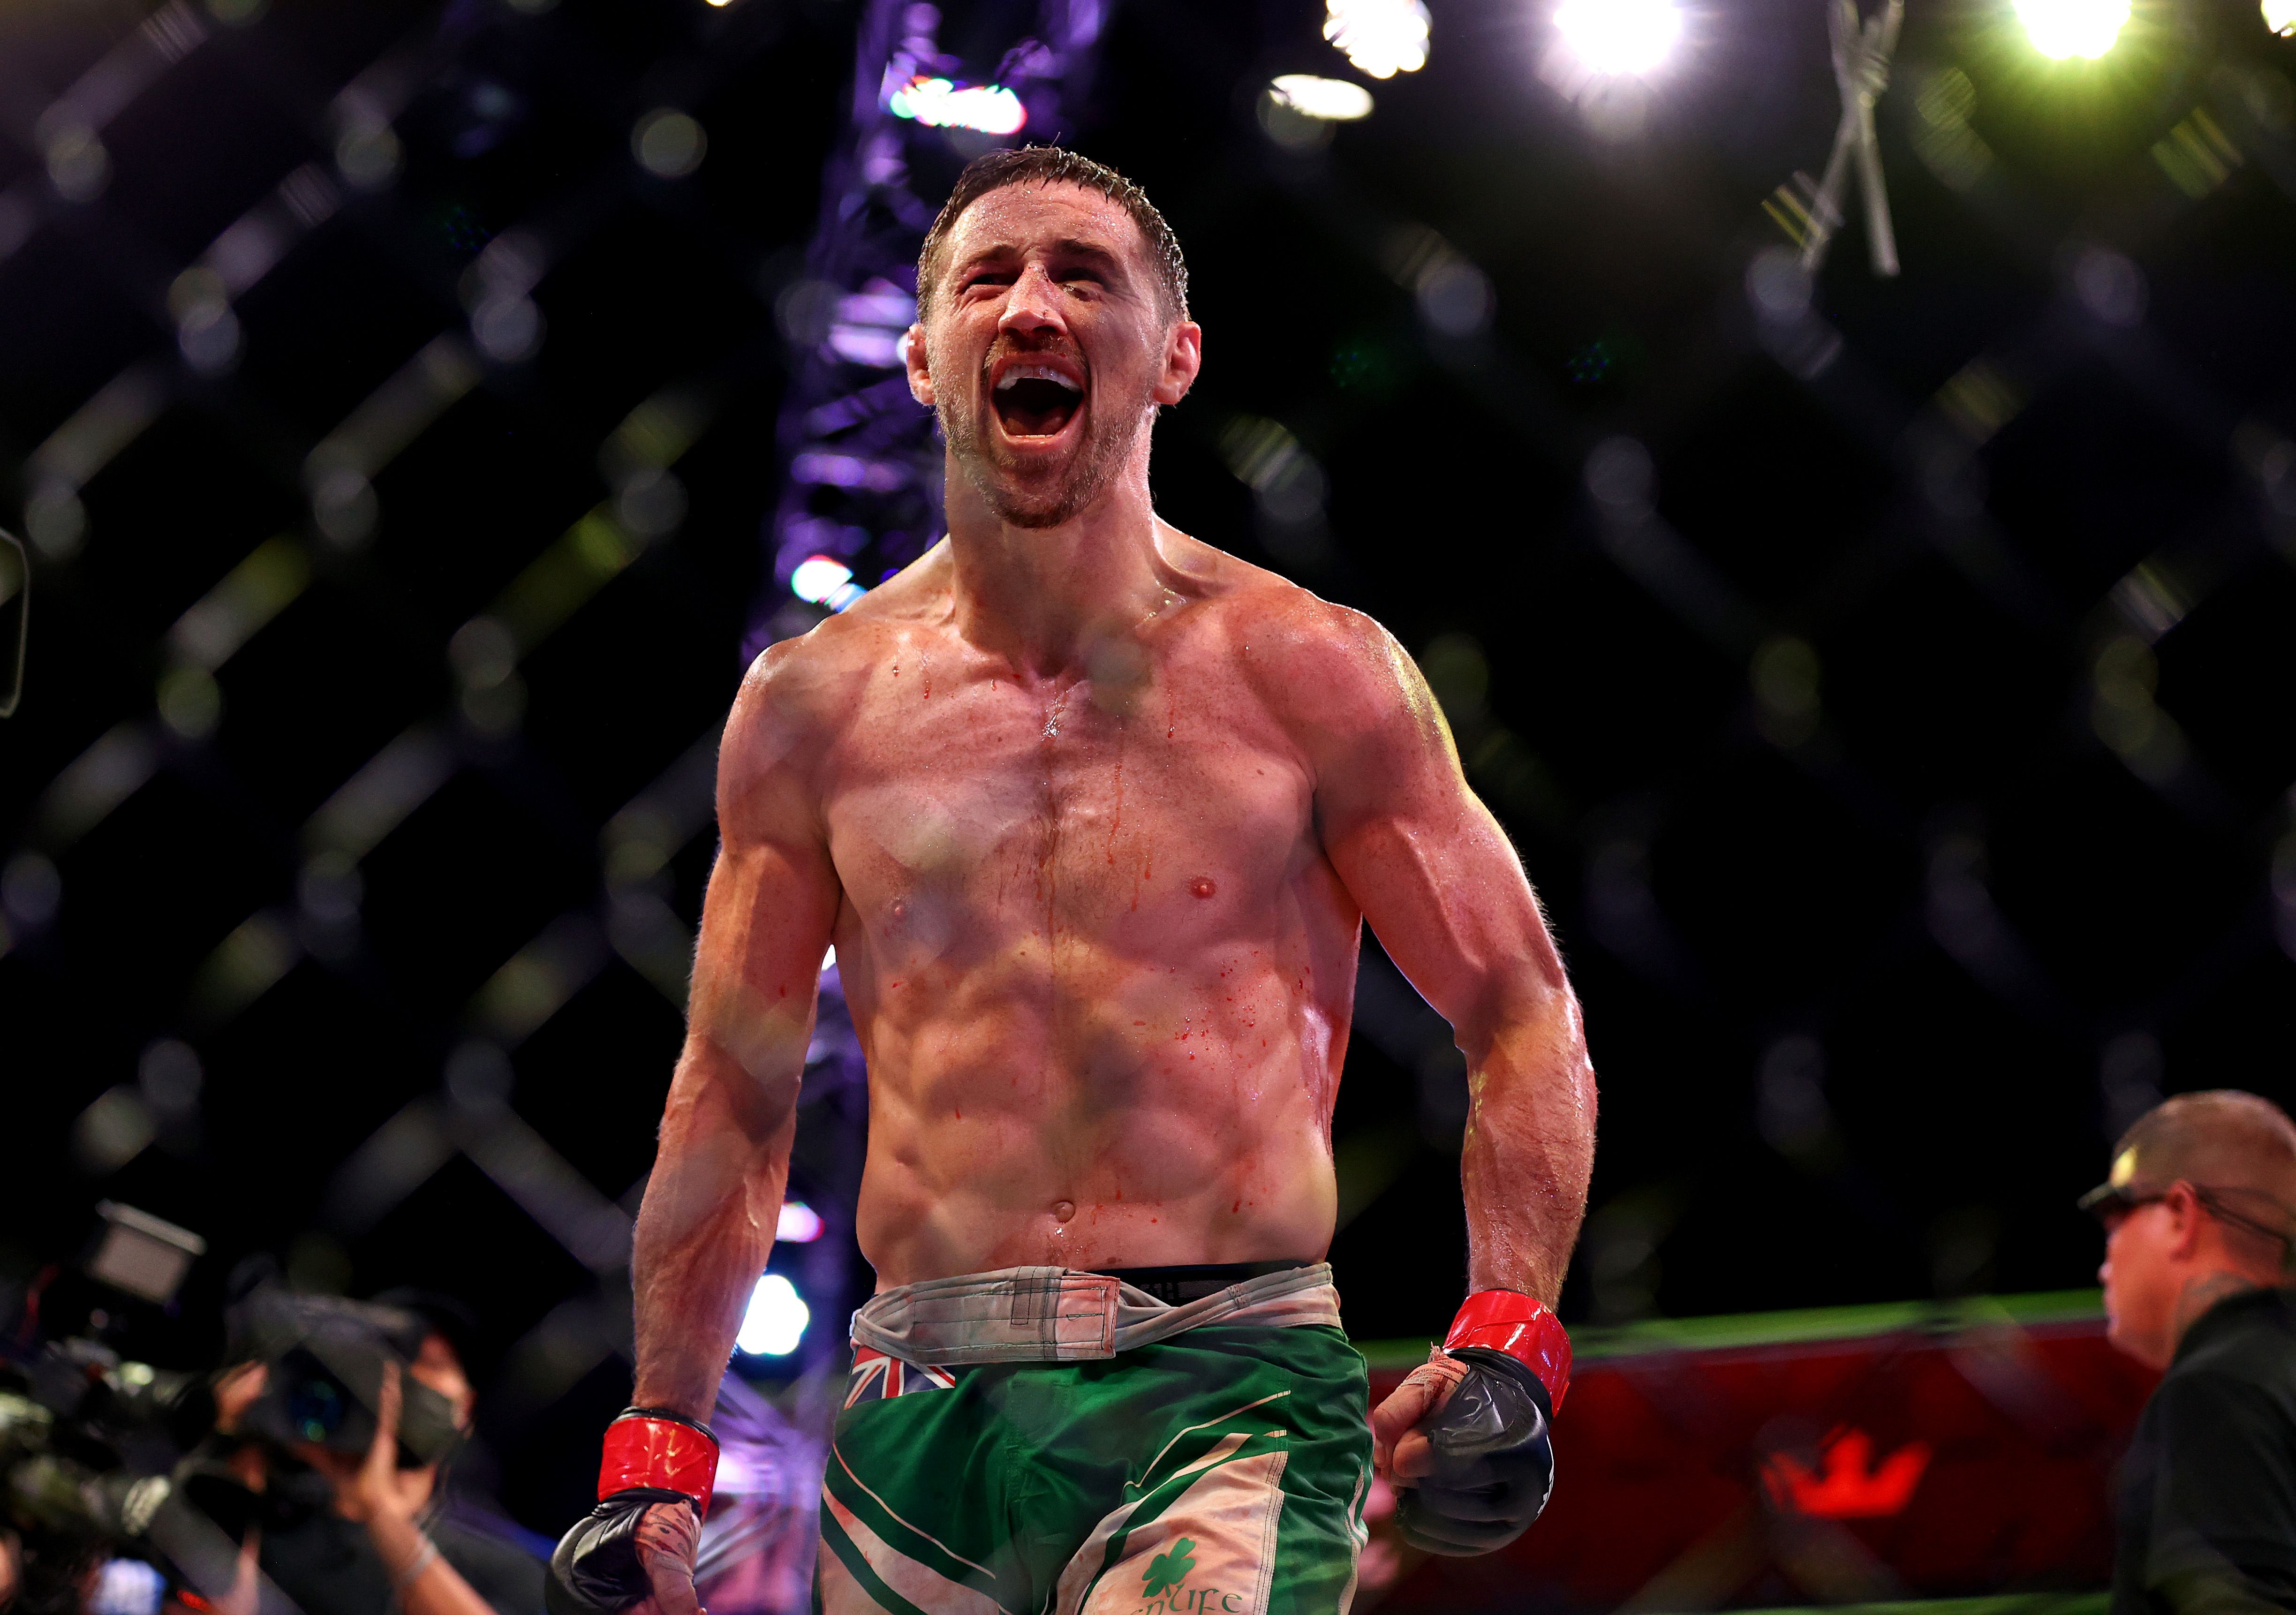 Brendan Loughane won the PFL featherweight tournament in 2022